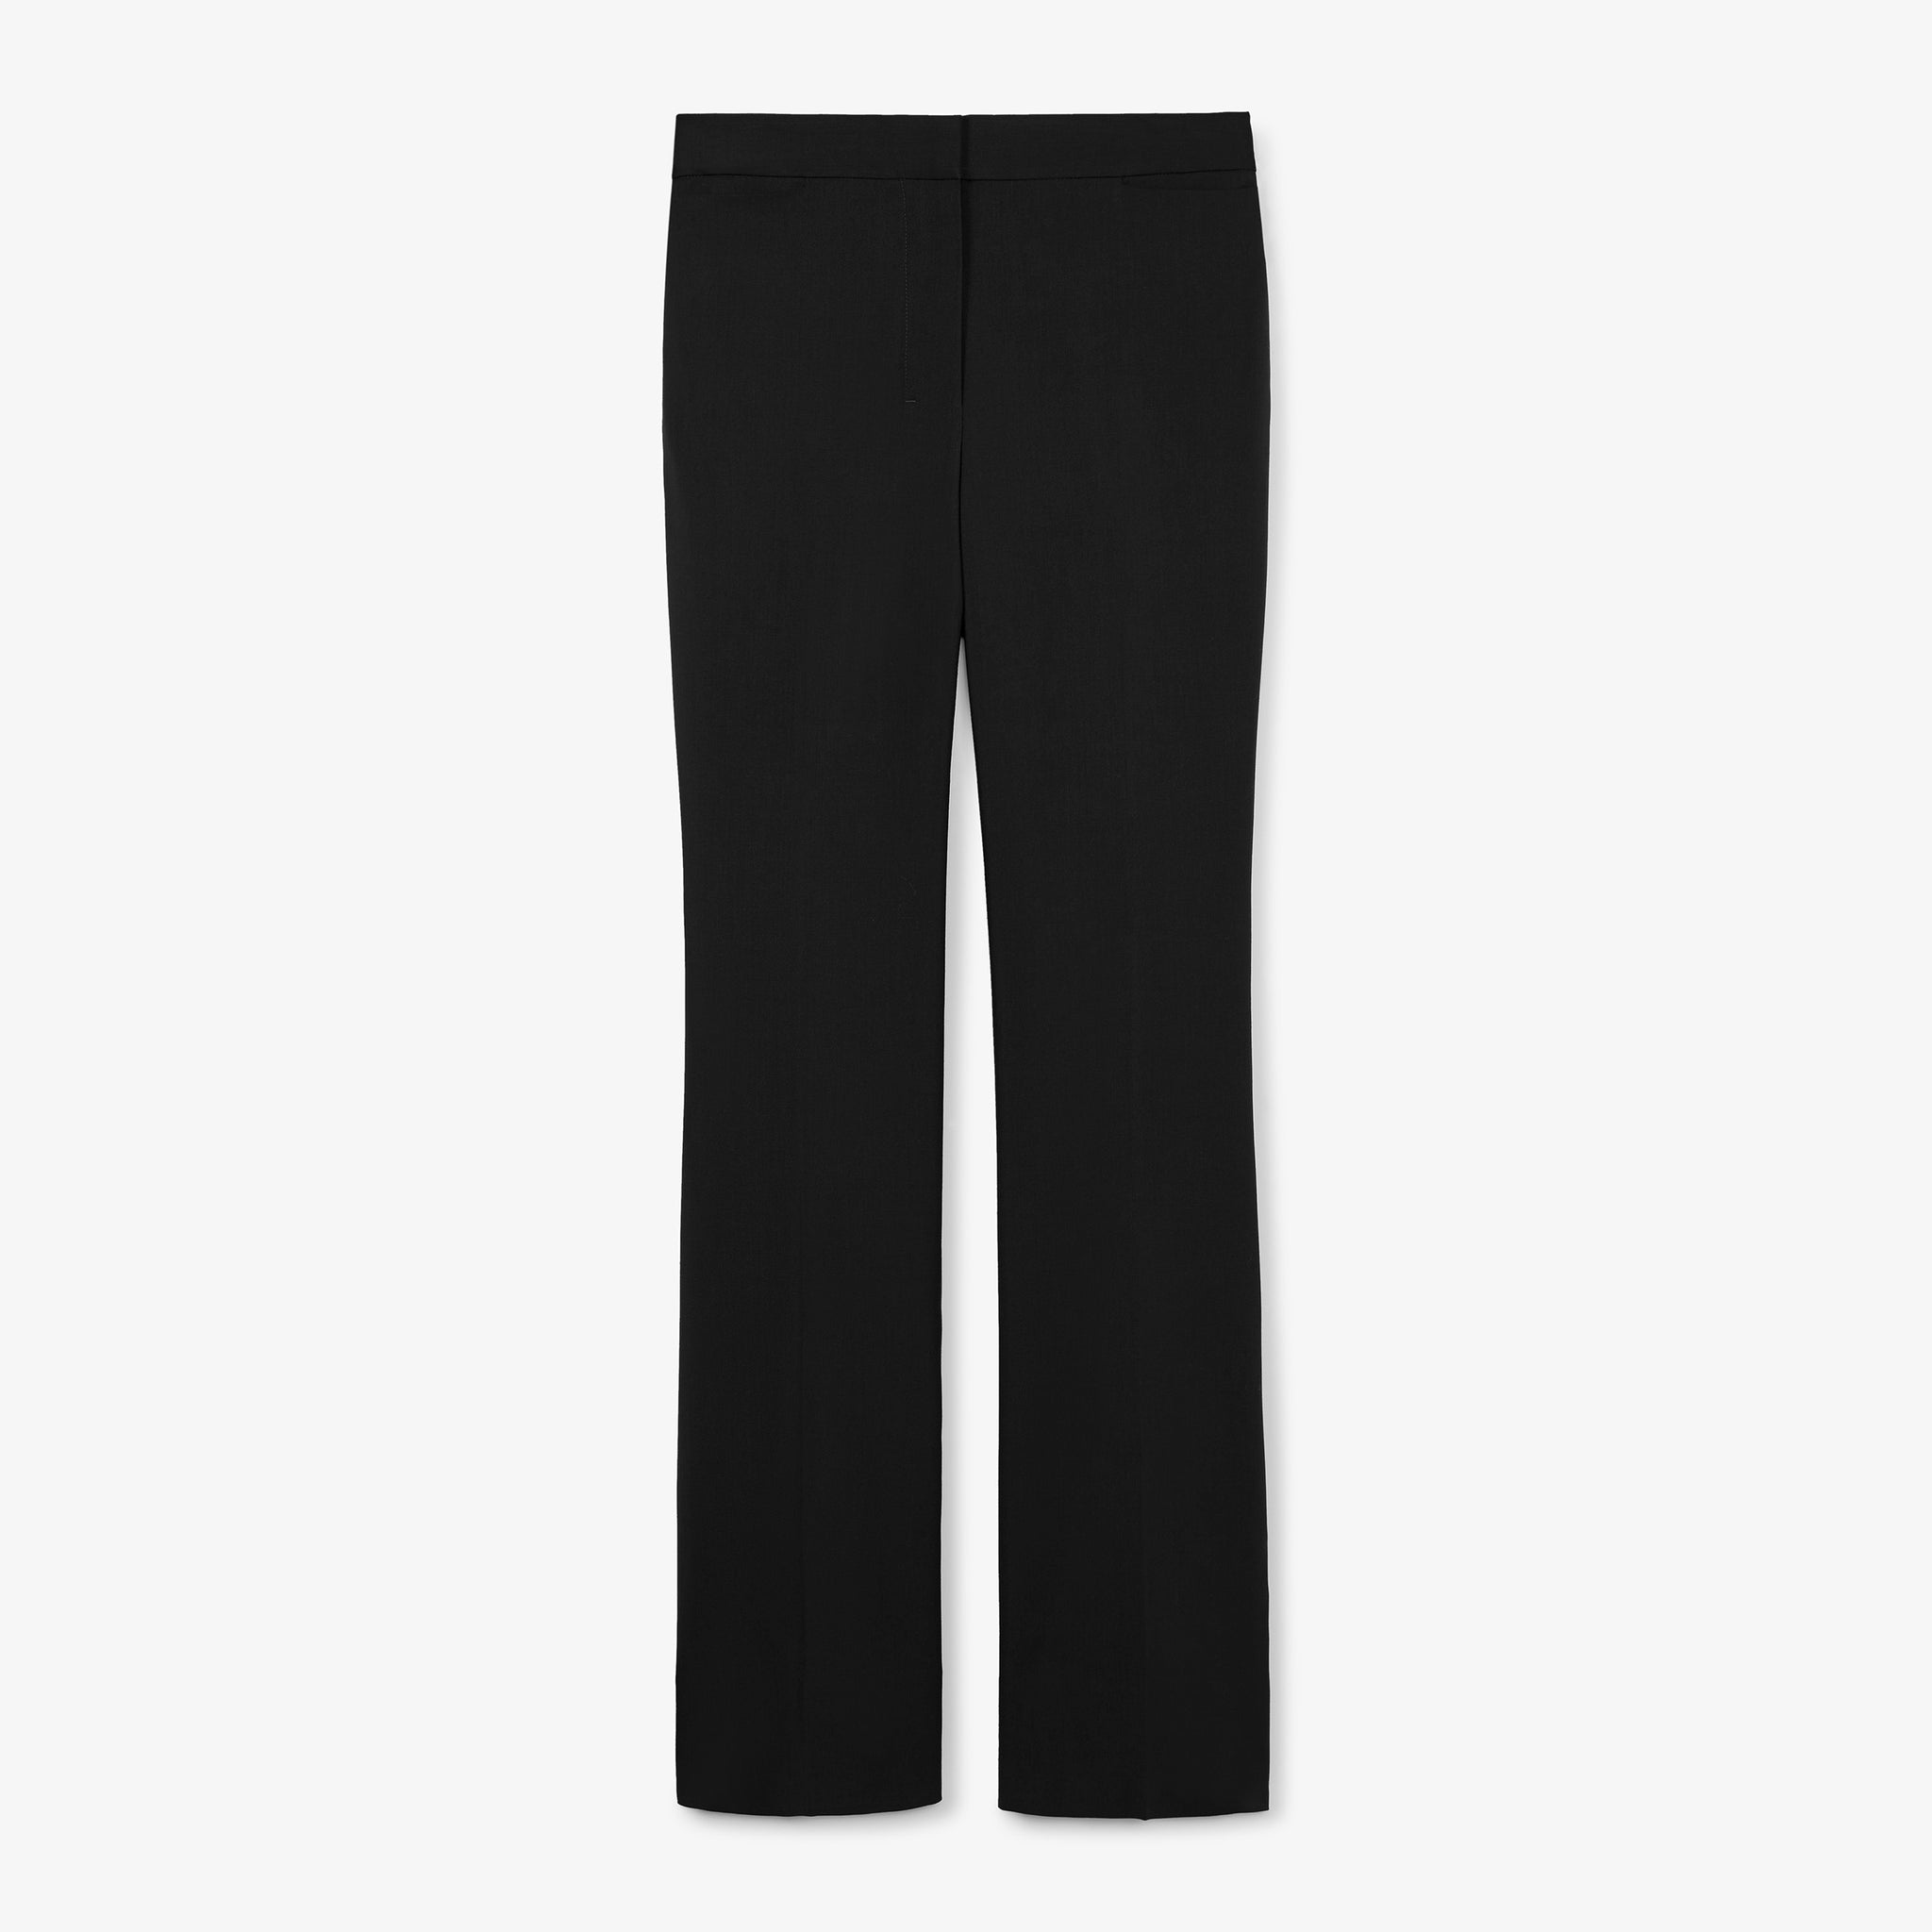 still image of the horton pant in black